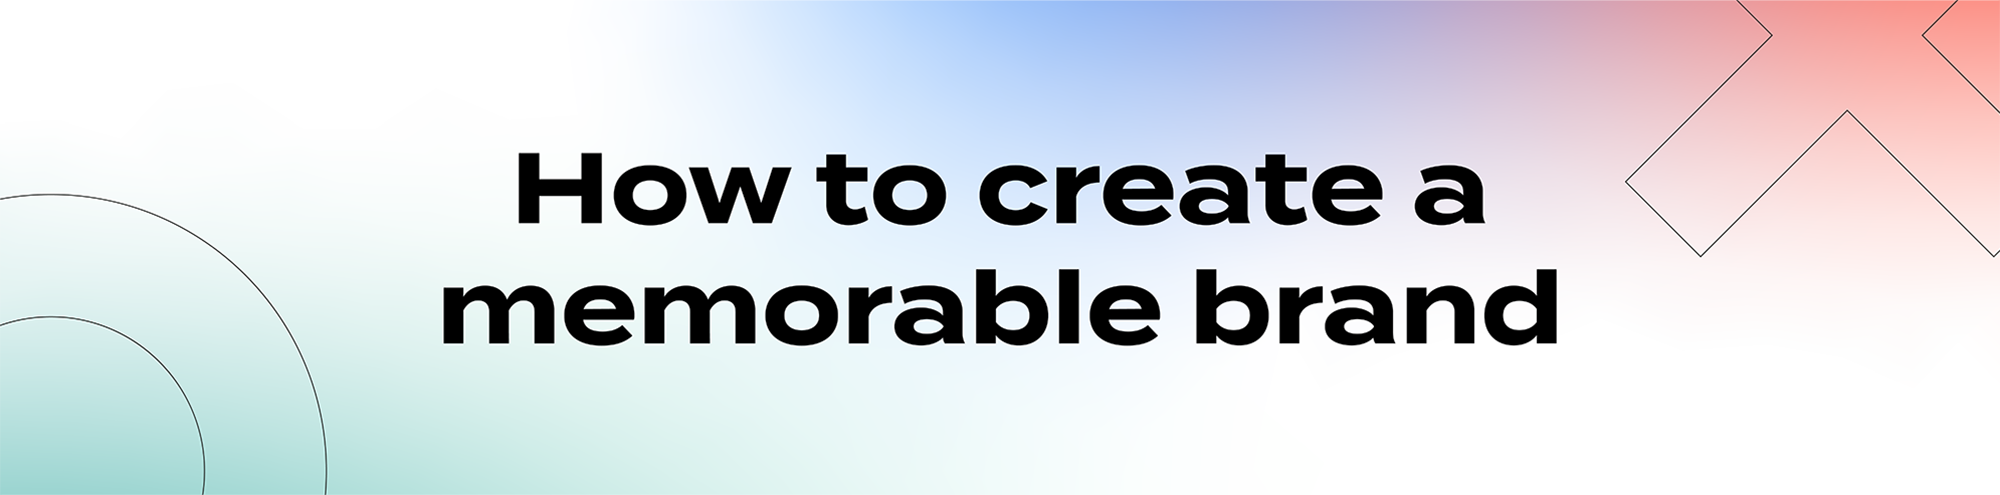 How to create a memorable brand